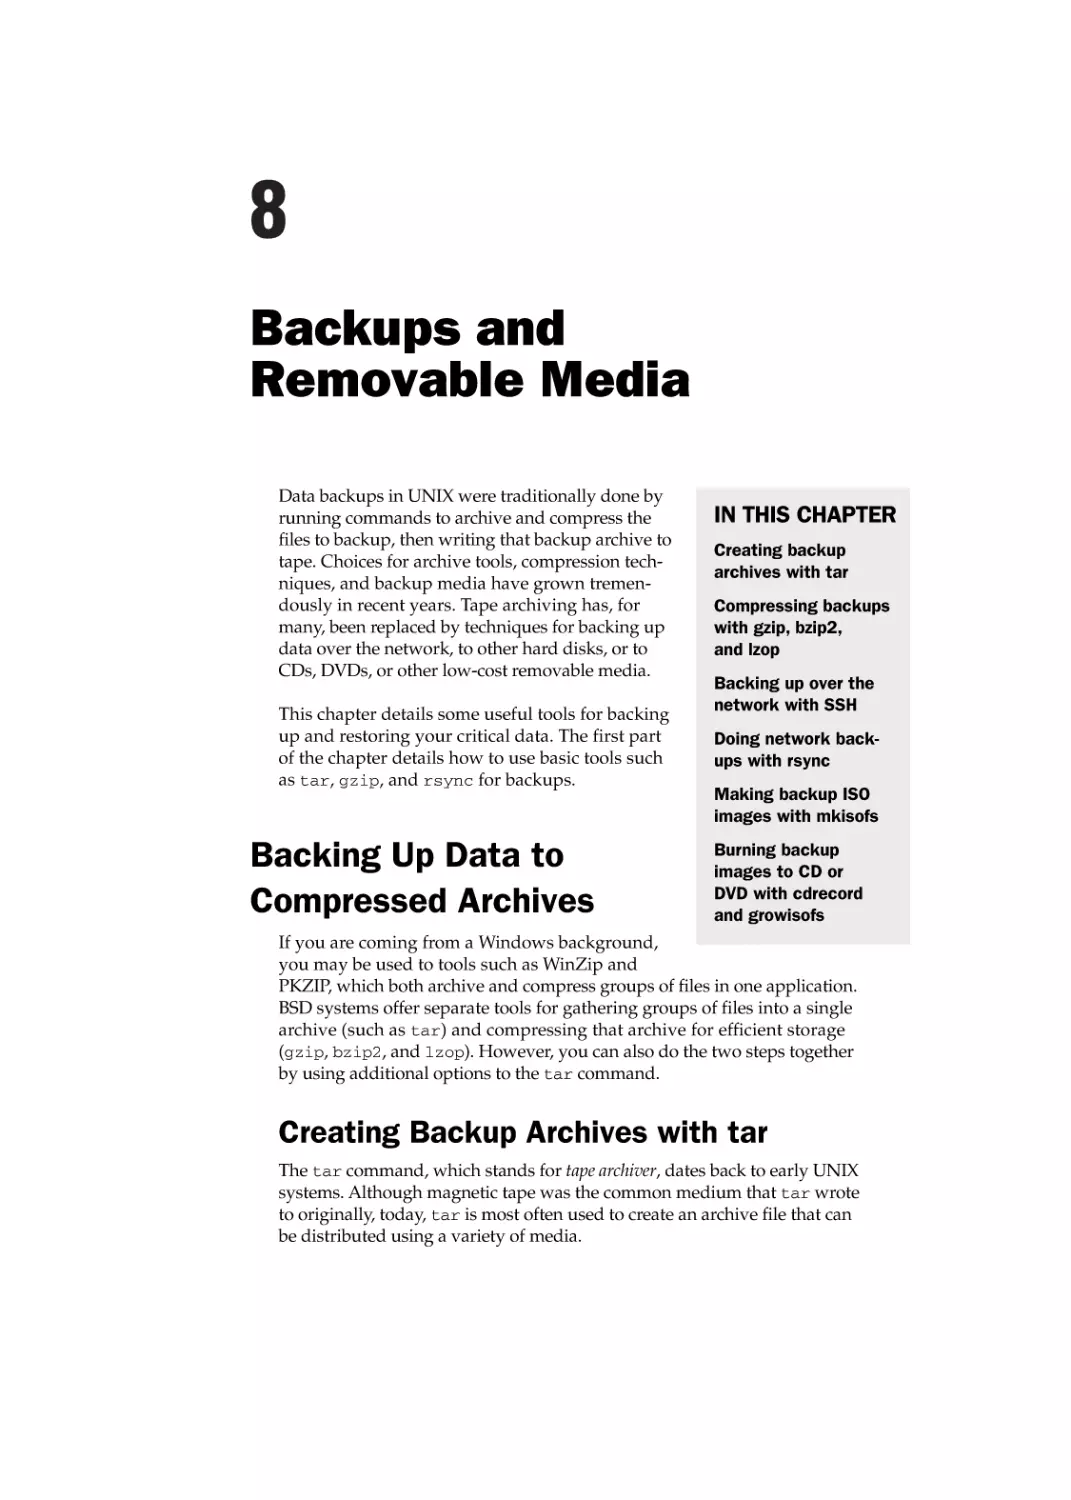 Chapter 8
Backing Up Data to Compressed Archives